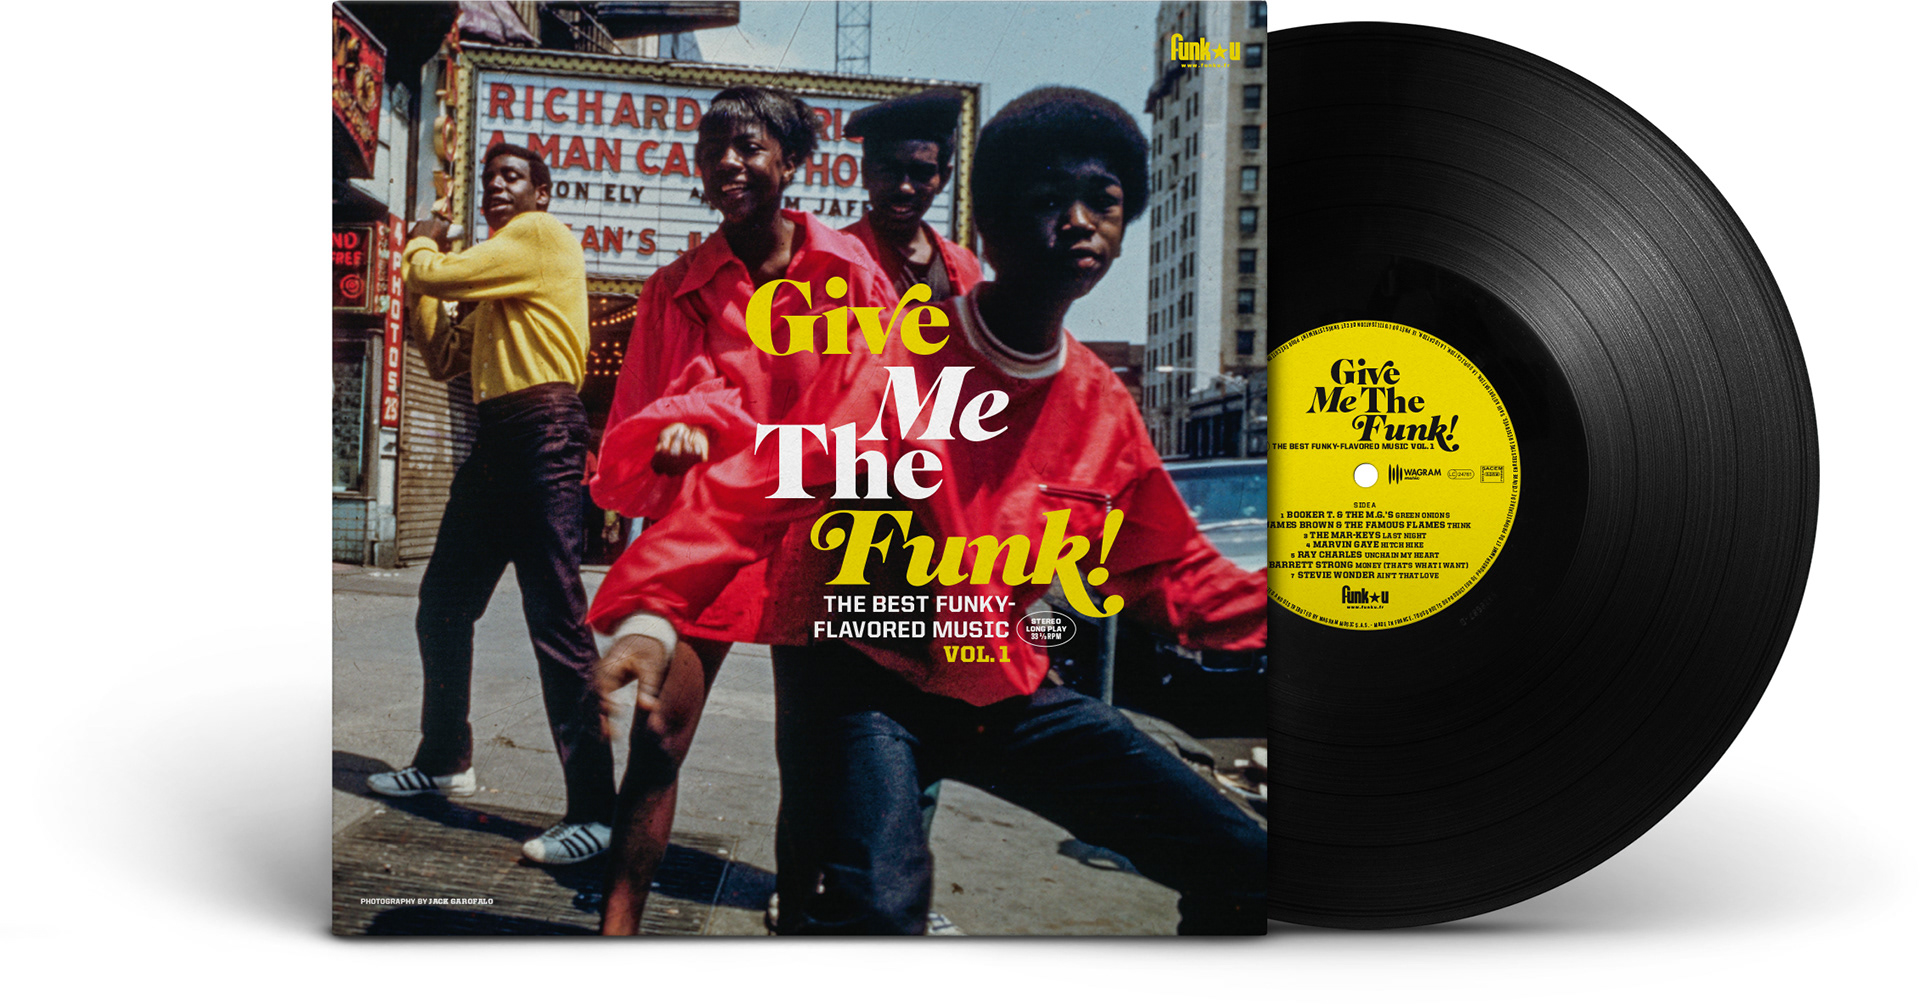 Give me the Funk vol1